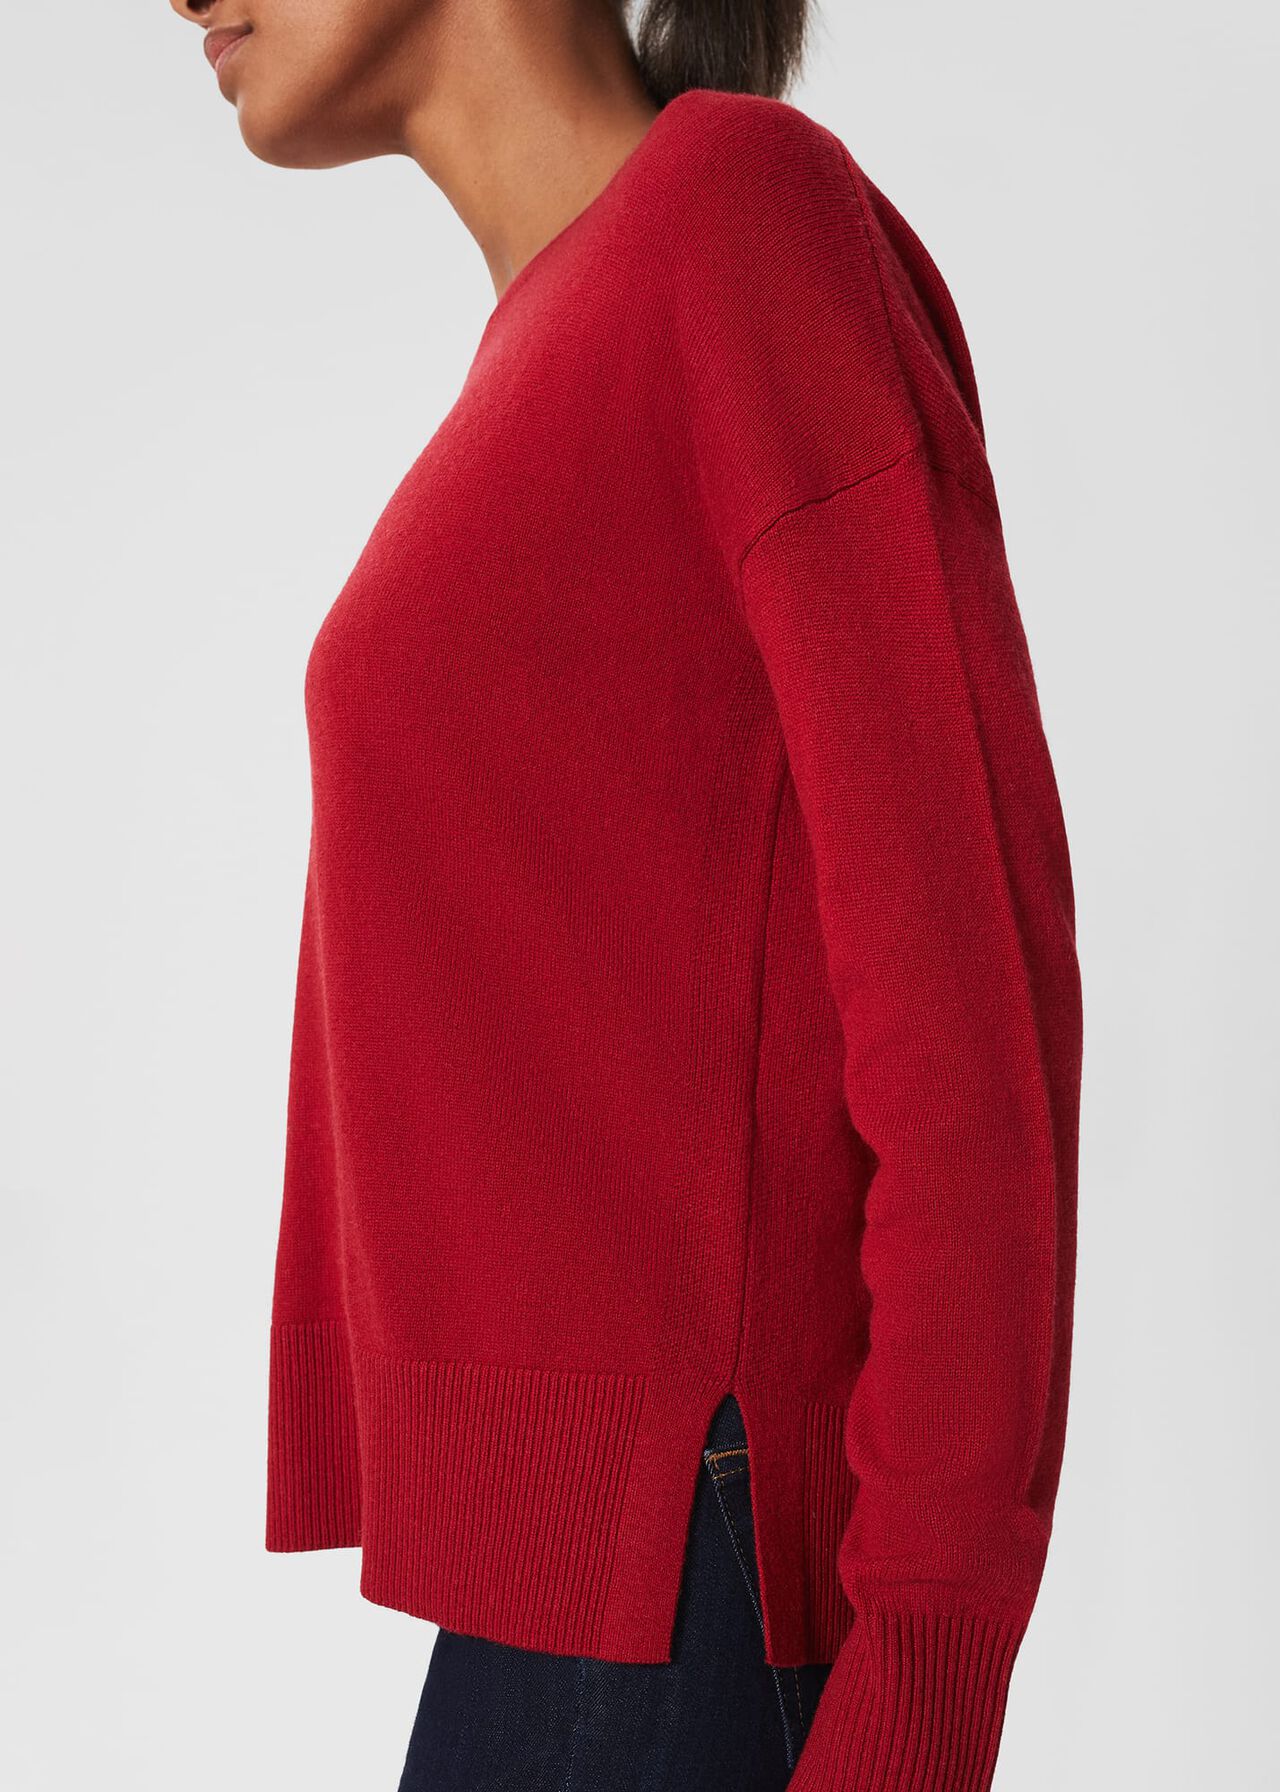 Lydia Button Jumper With Cashmere, Red, hi-res